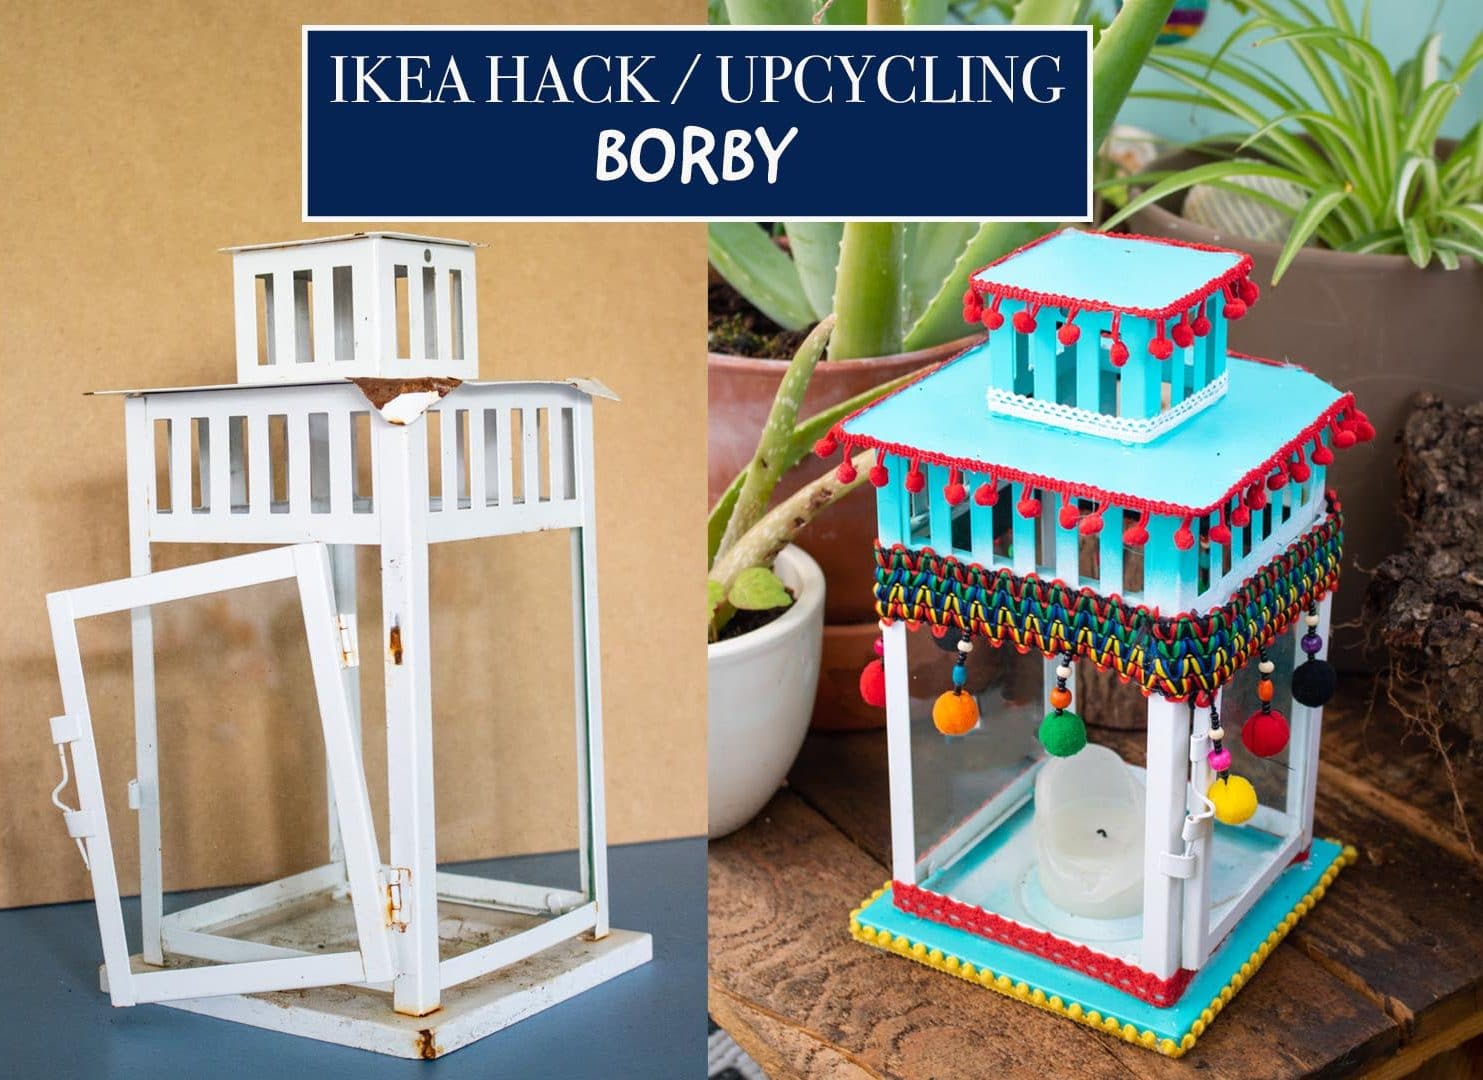 Ikea hack borby laterne upcycling